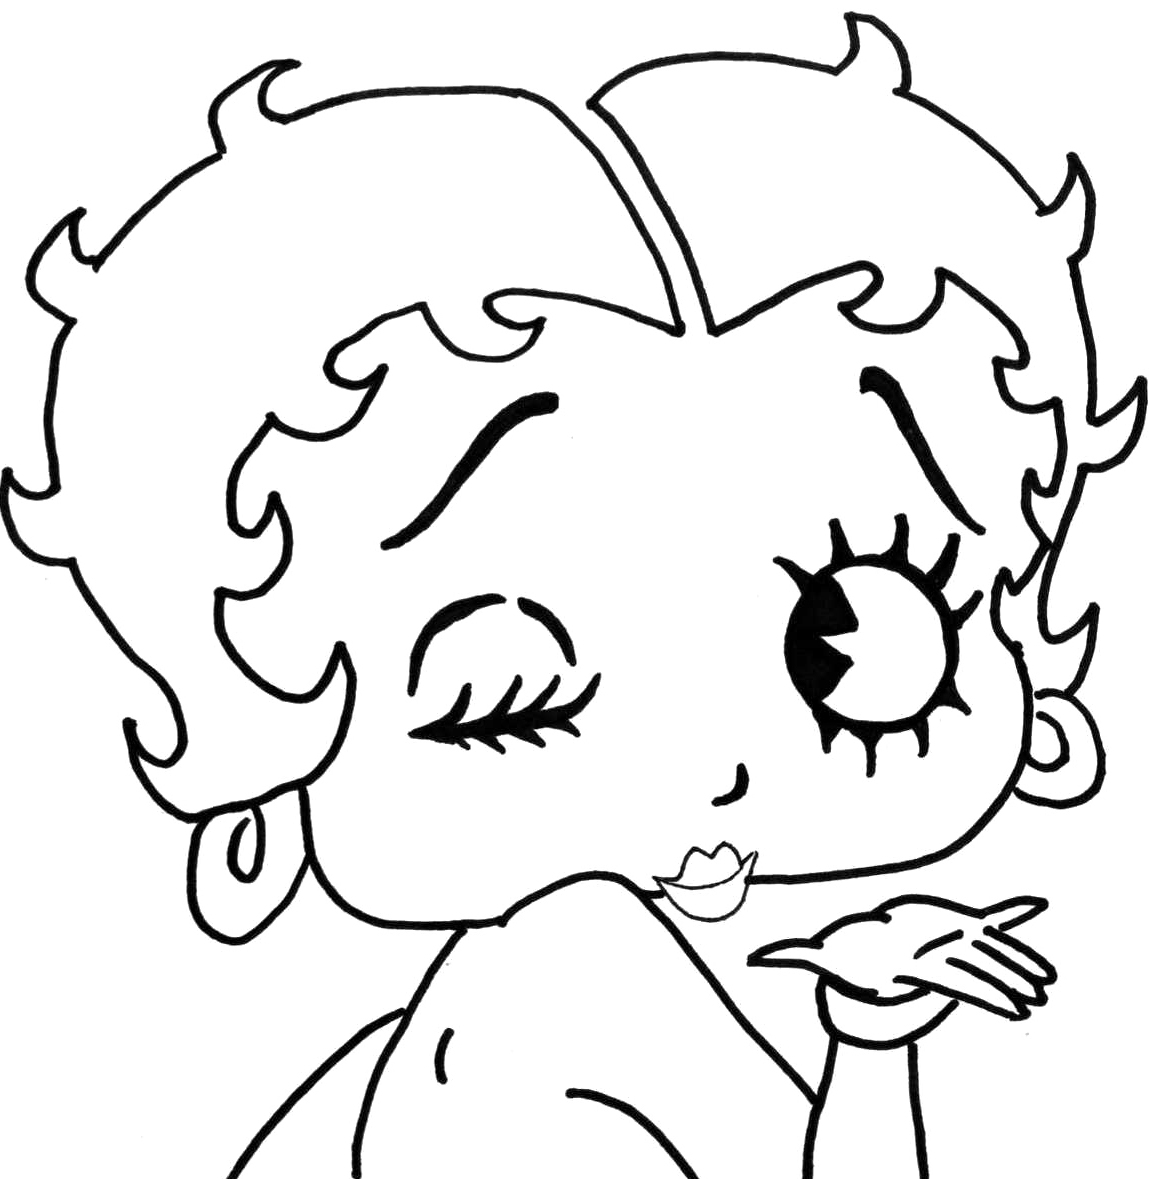 step by step drawing betty boop